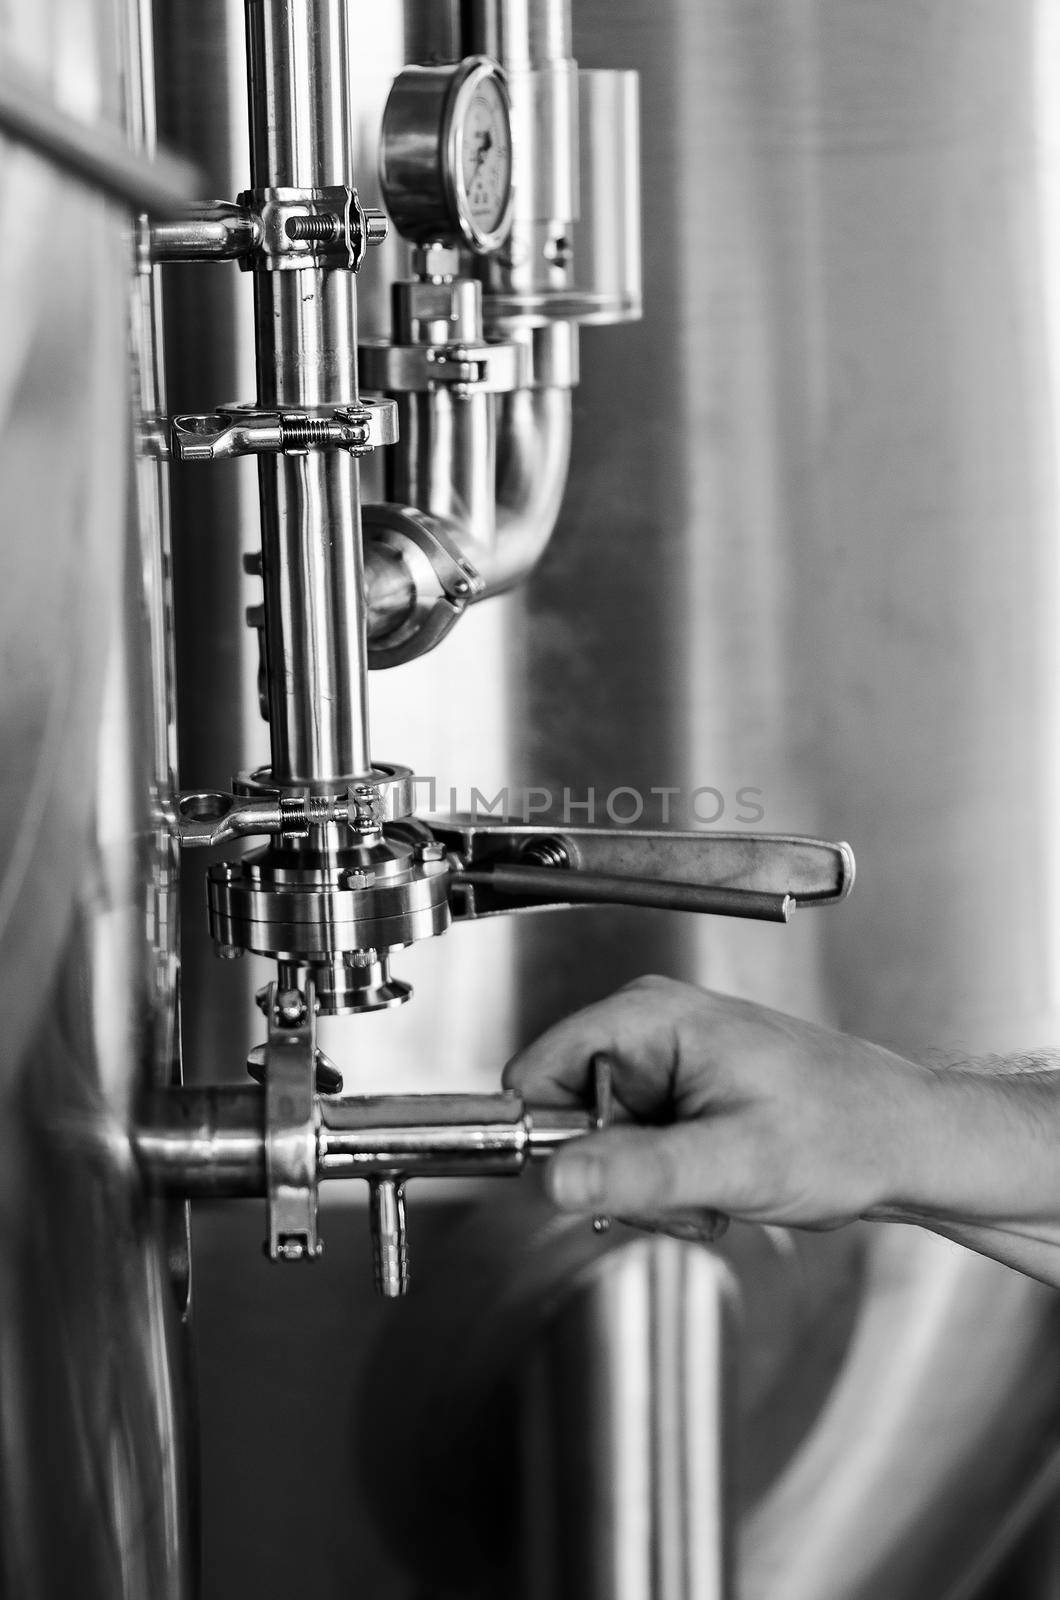 brewer operating industrial beer brewing equipment in brewery interior by jackmalipan